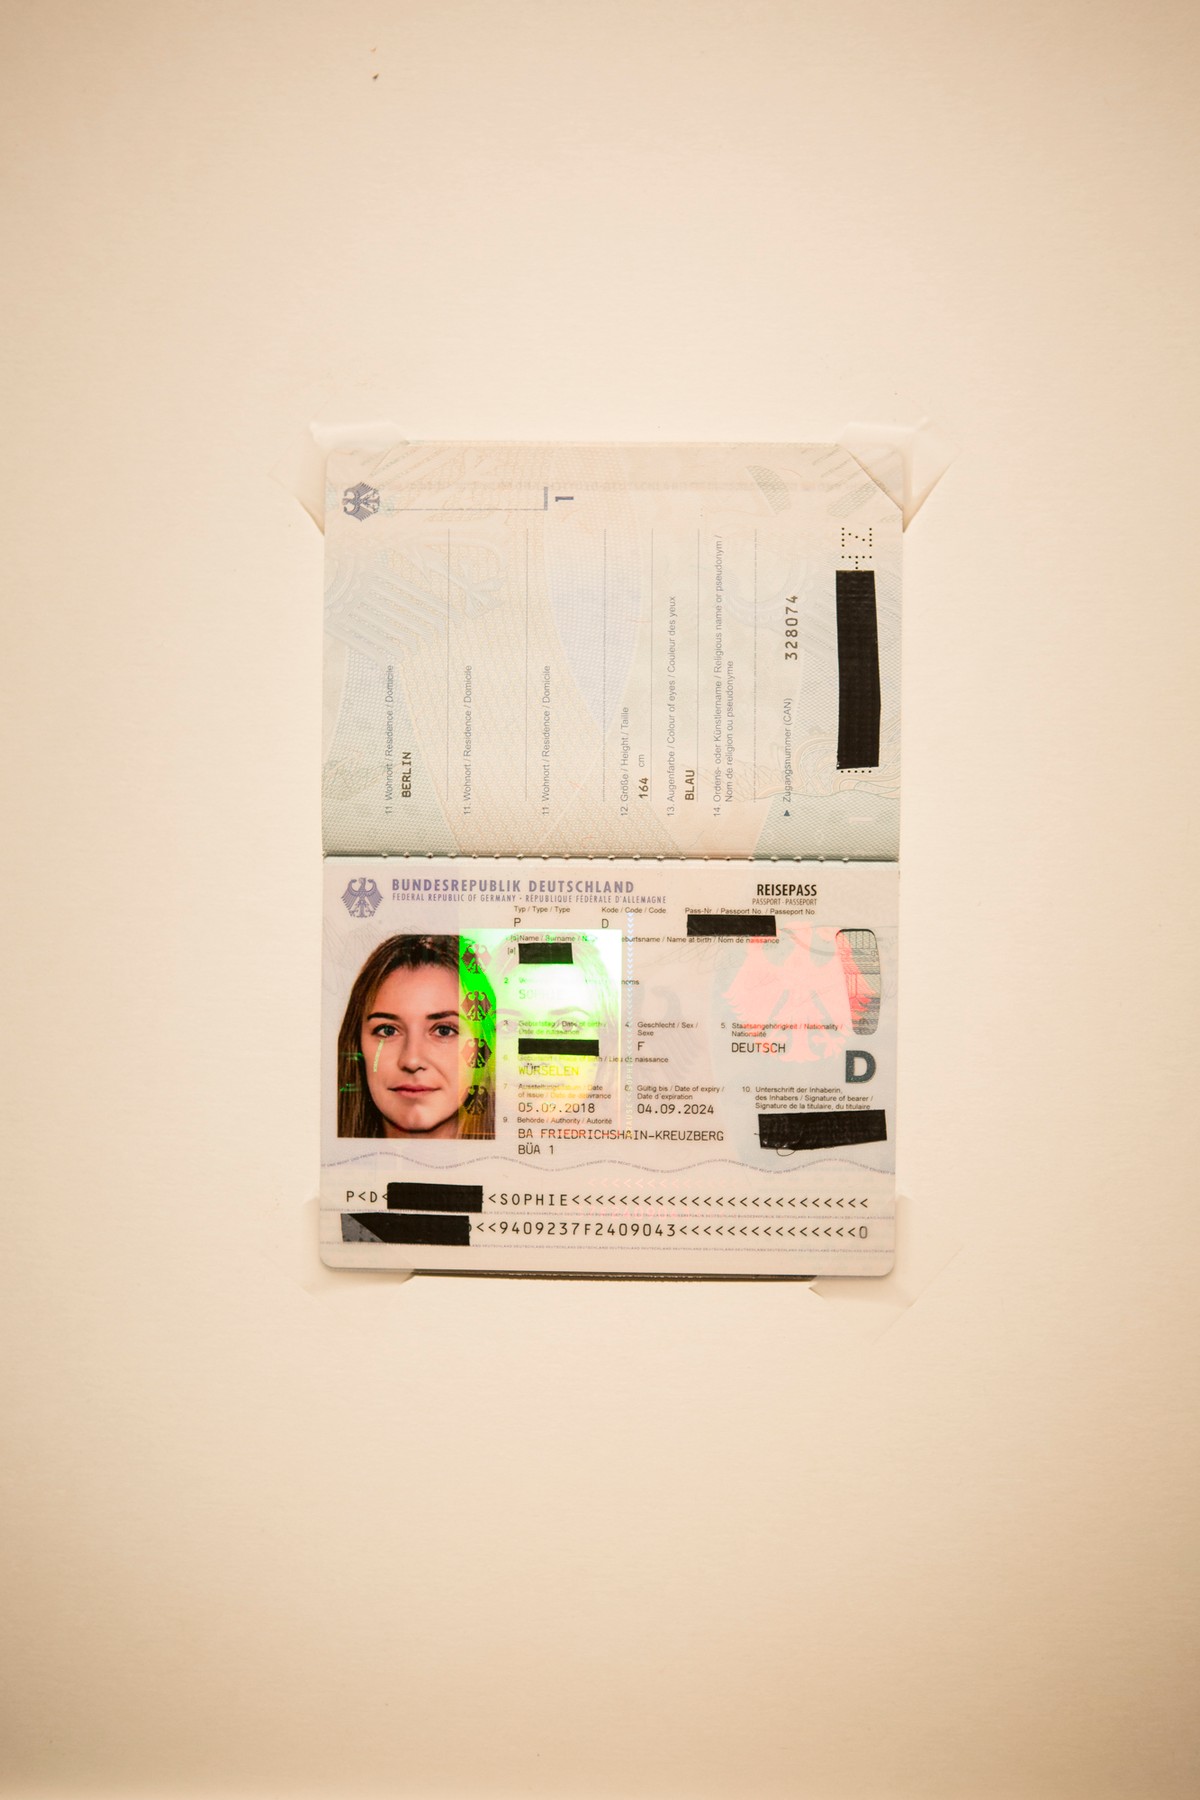 German Art Activists Get Passport Using Digitally Altered Photo of Two  Women Merged Together